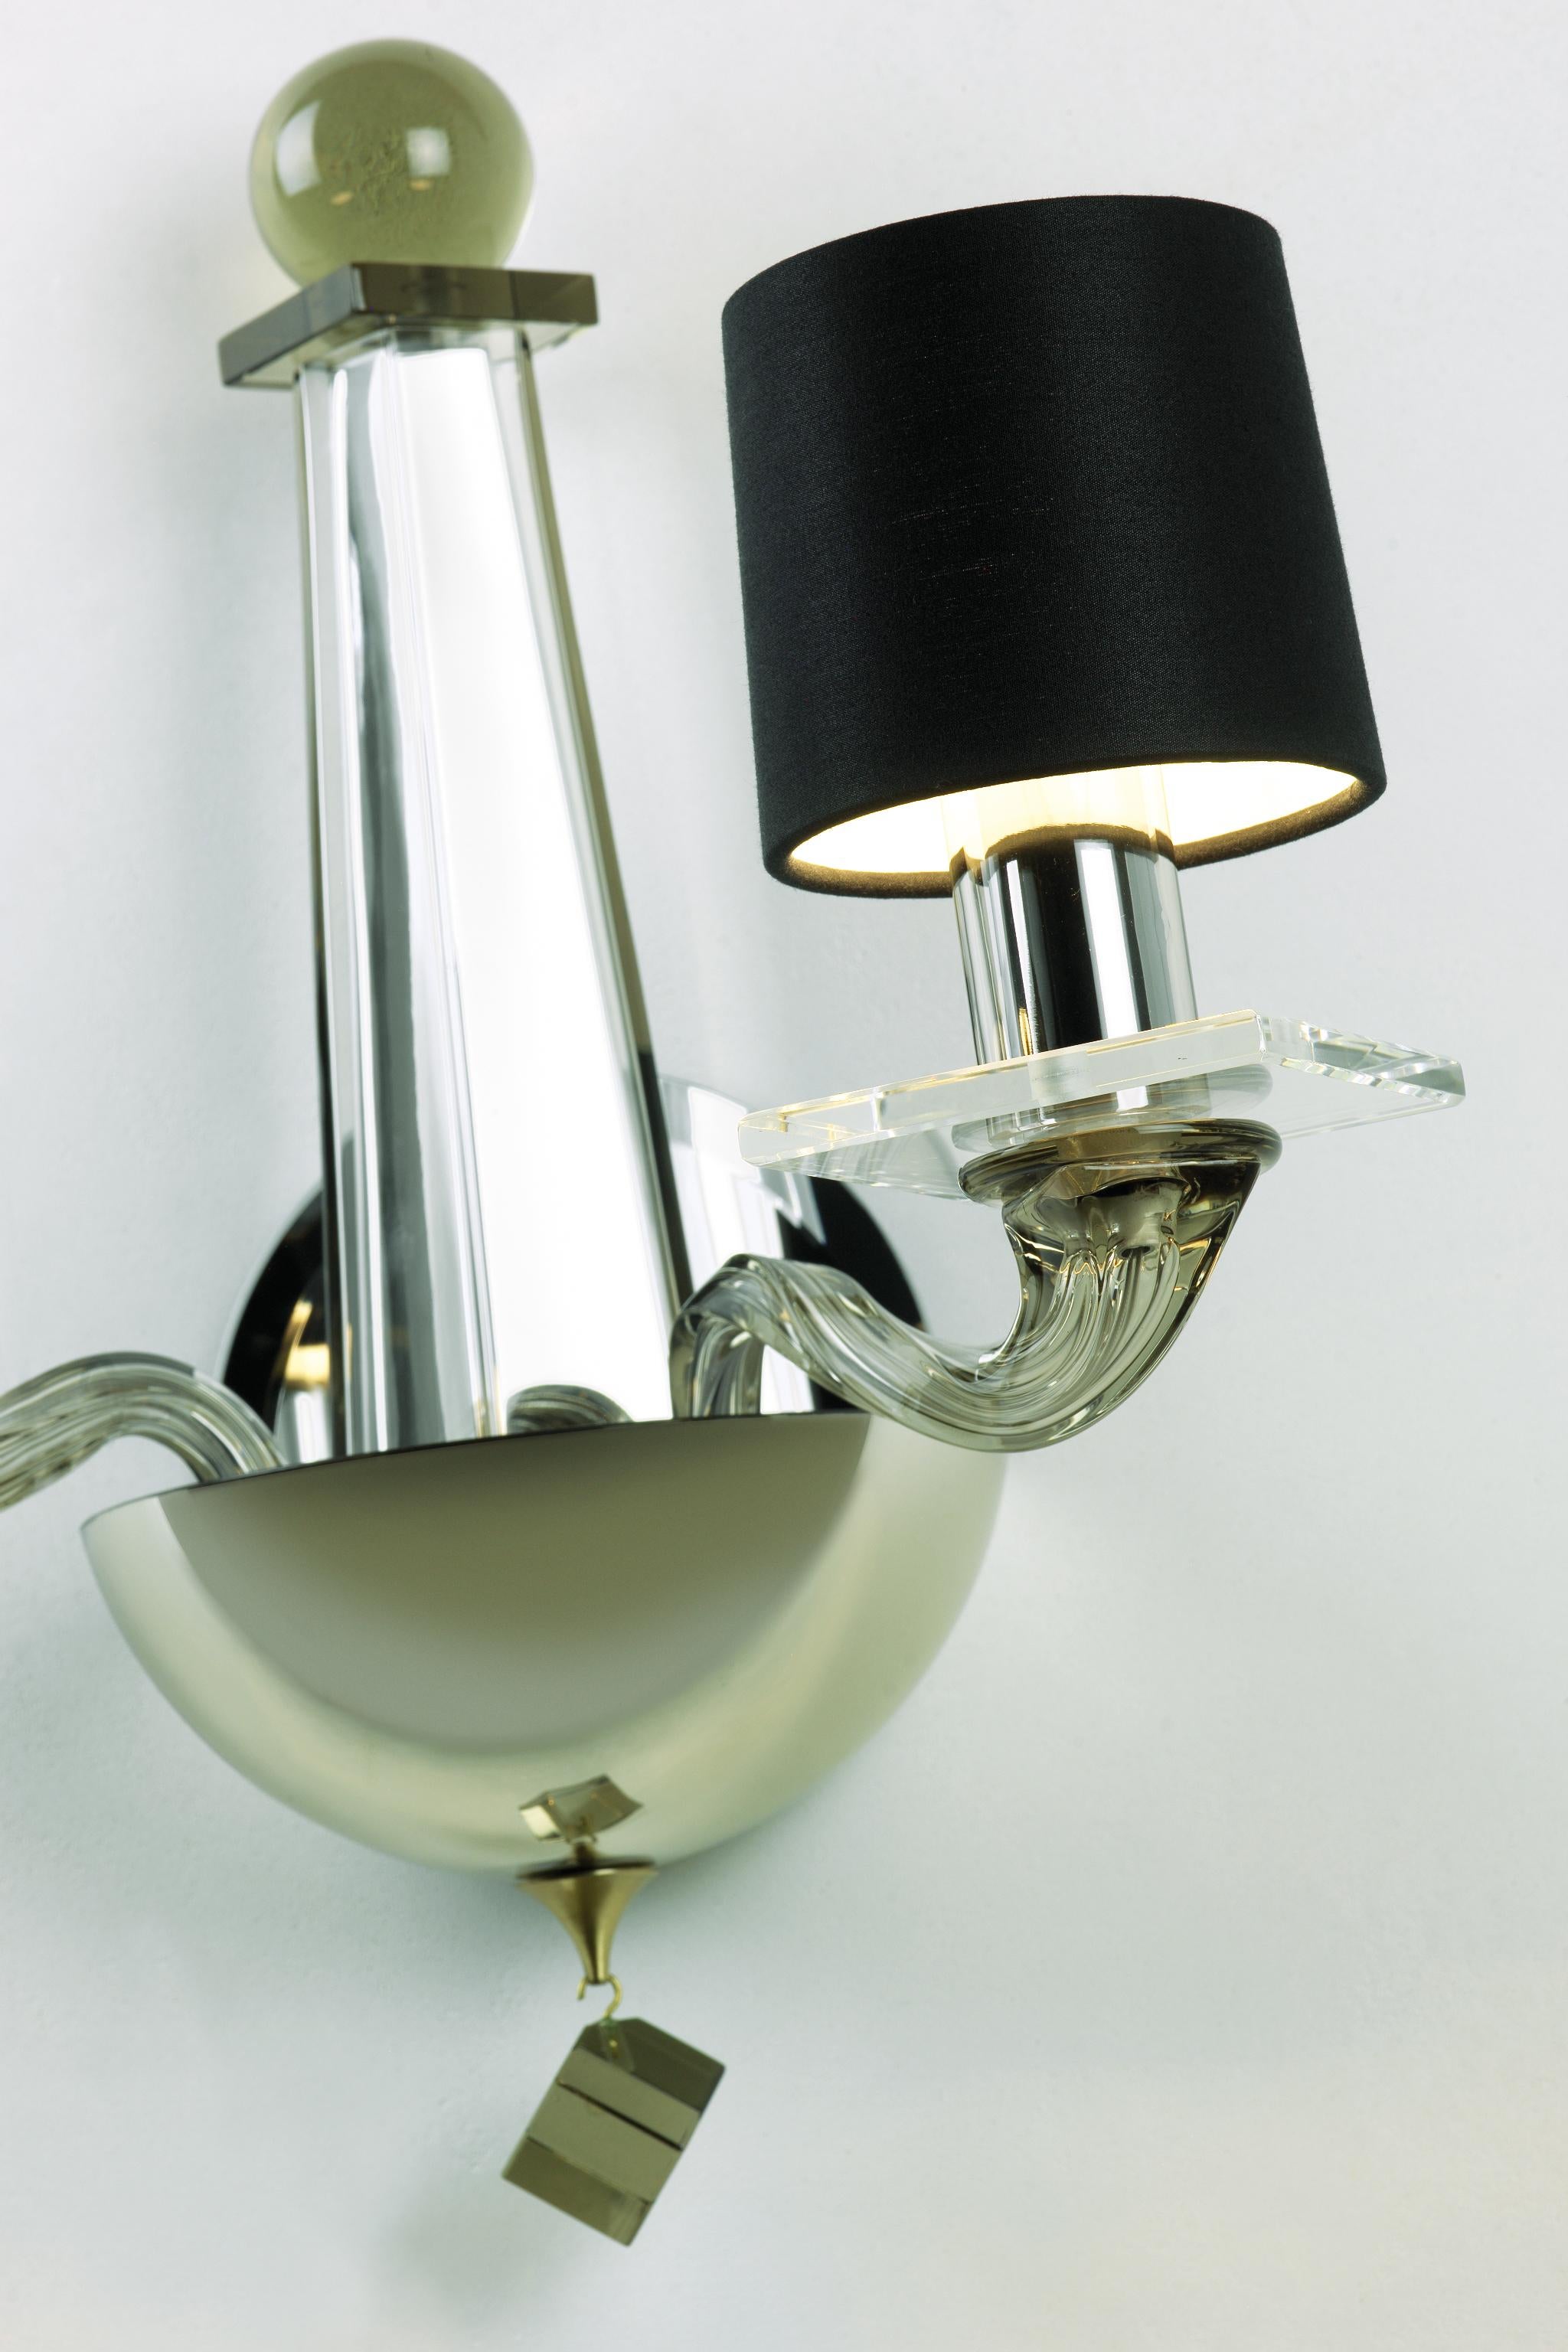 A stunning handblown Venetian glass sconce with two arms and infinite charm. The two-arm wall sconce in handblown Murano glass. Clear glass with gold leaf inclusions, hand-silvered glass, and brass hardware.

- Backplate dimensions: 5.5